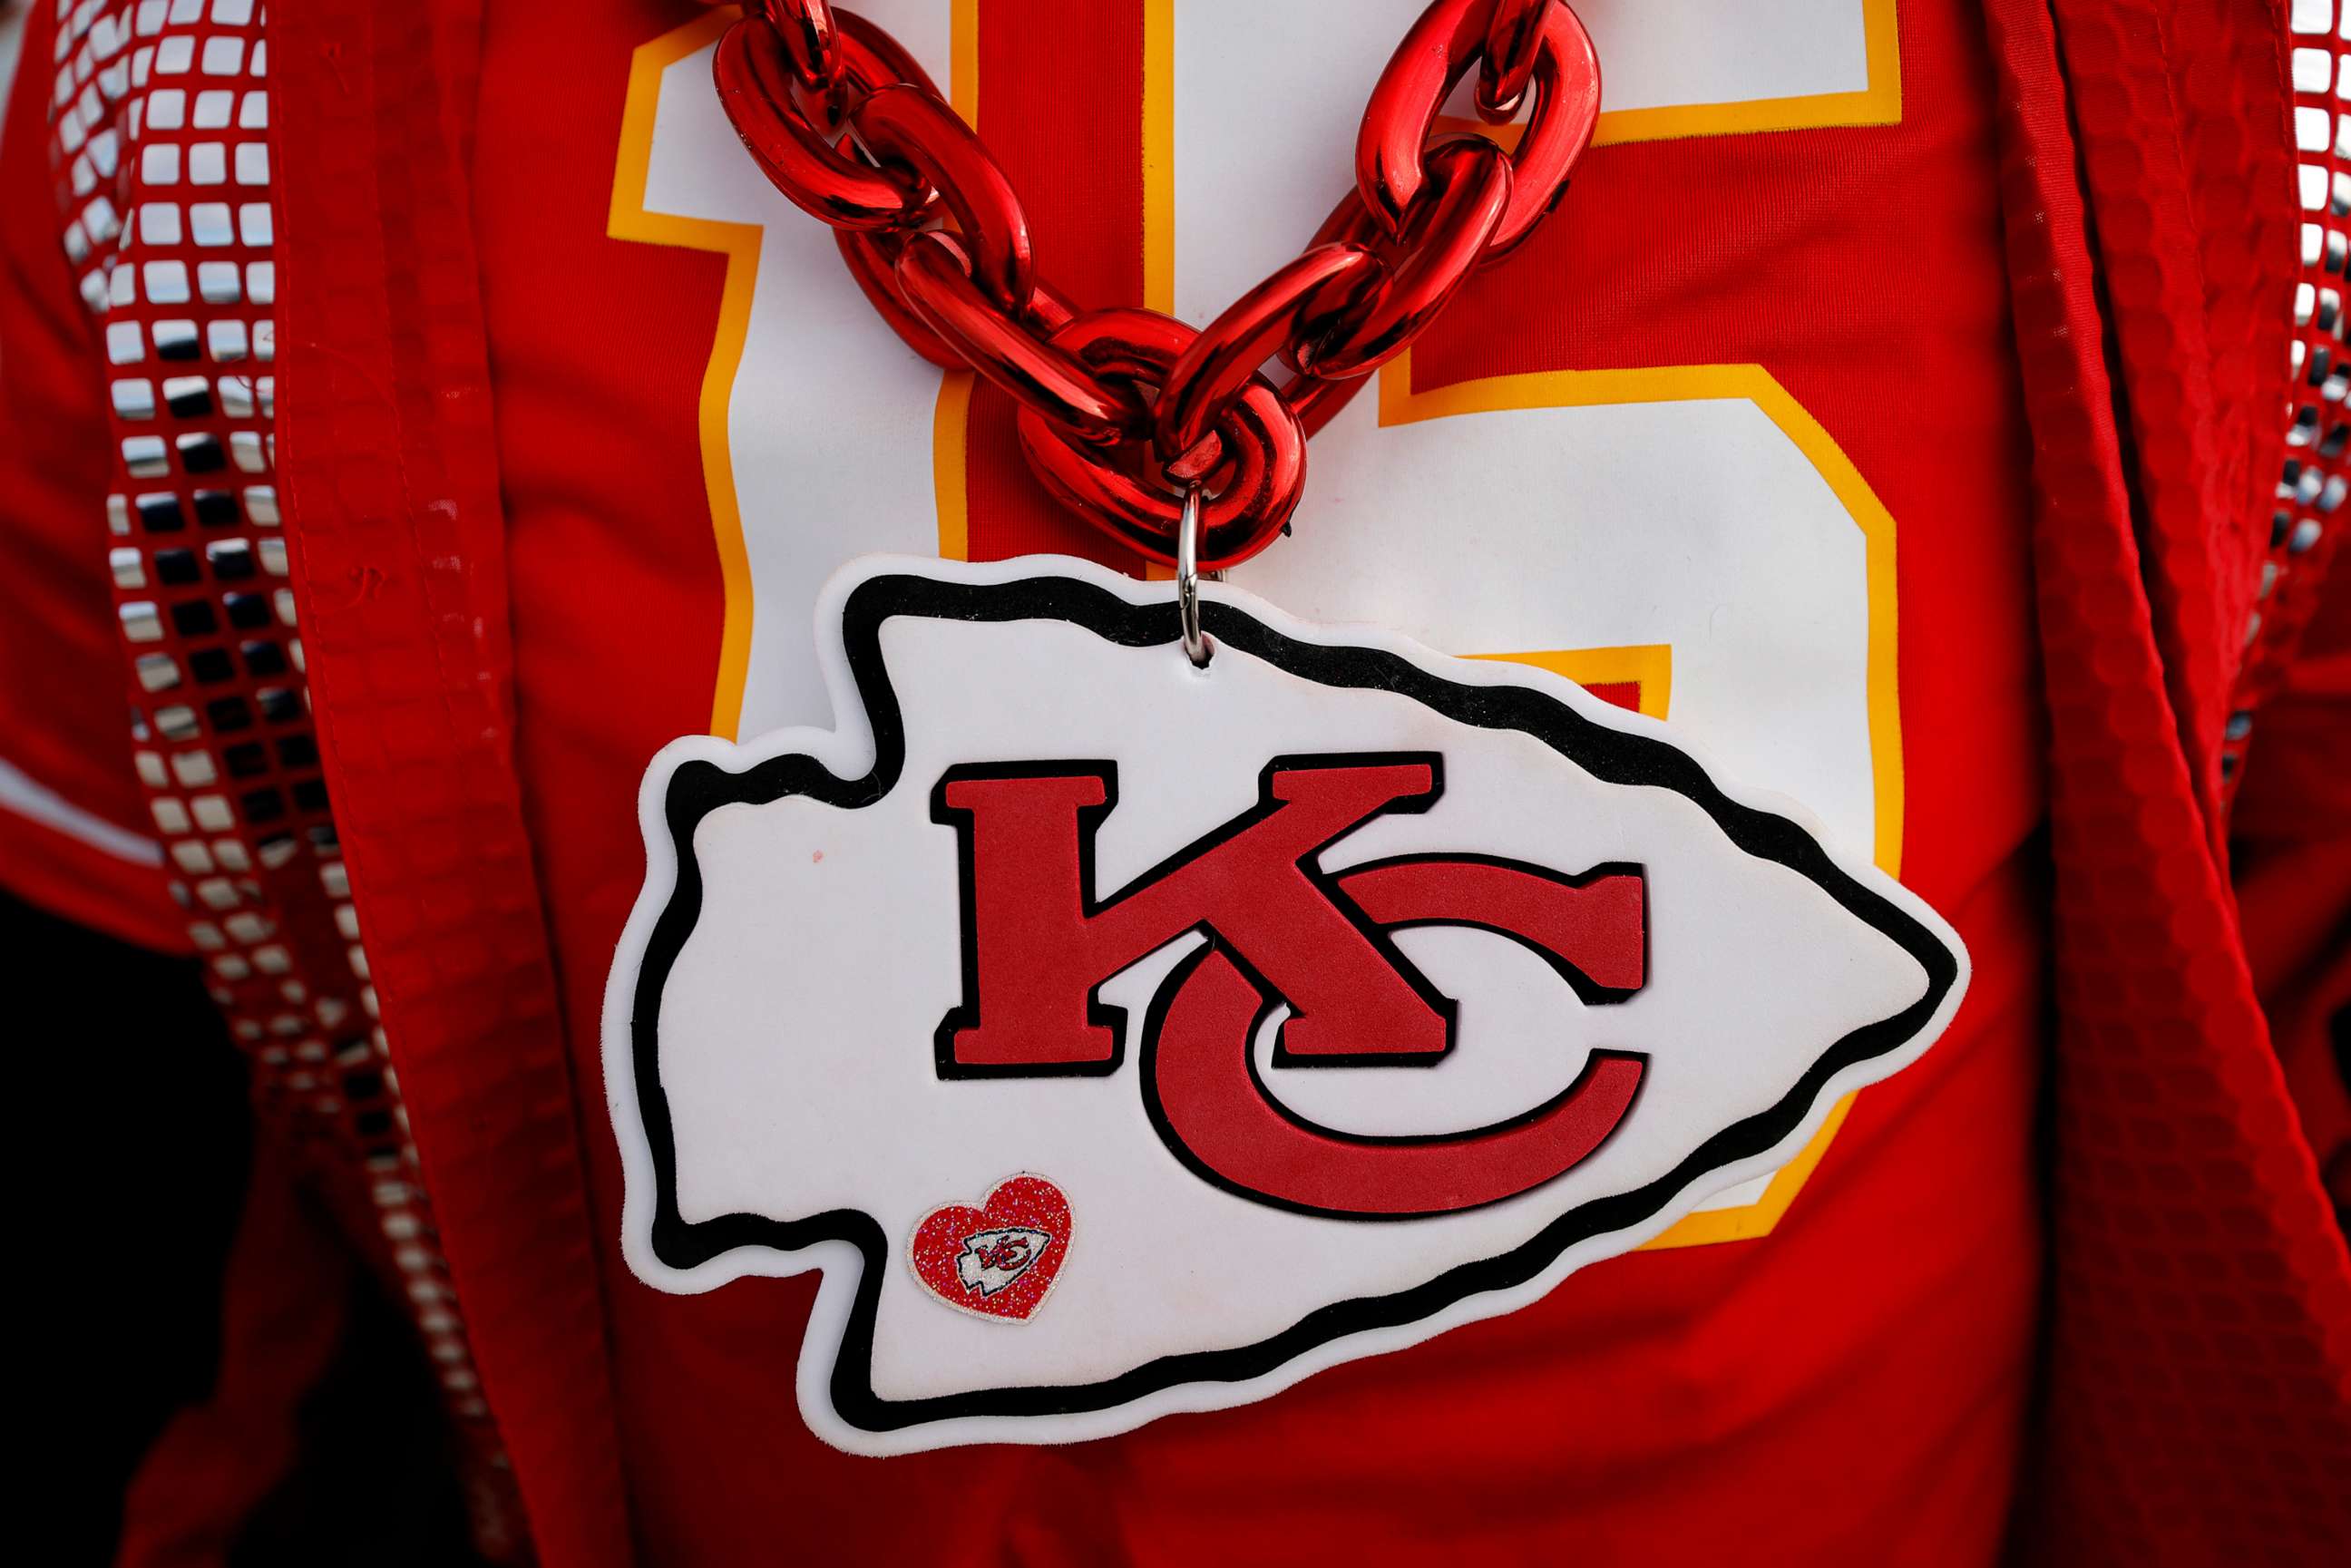 PHOTO: A detailed view of the Kansas City Chiefs logo on a fan prior to the AFC Championship Game against the Cincinnati Bengals at GEHA Field at Arrowhead Stadium on Jan. 29, 2023 in Kansas City, Mo.